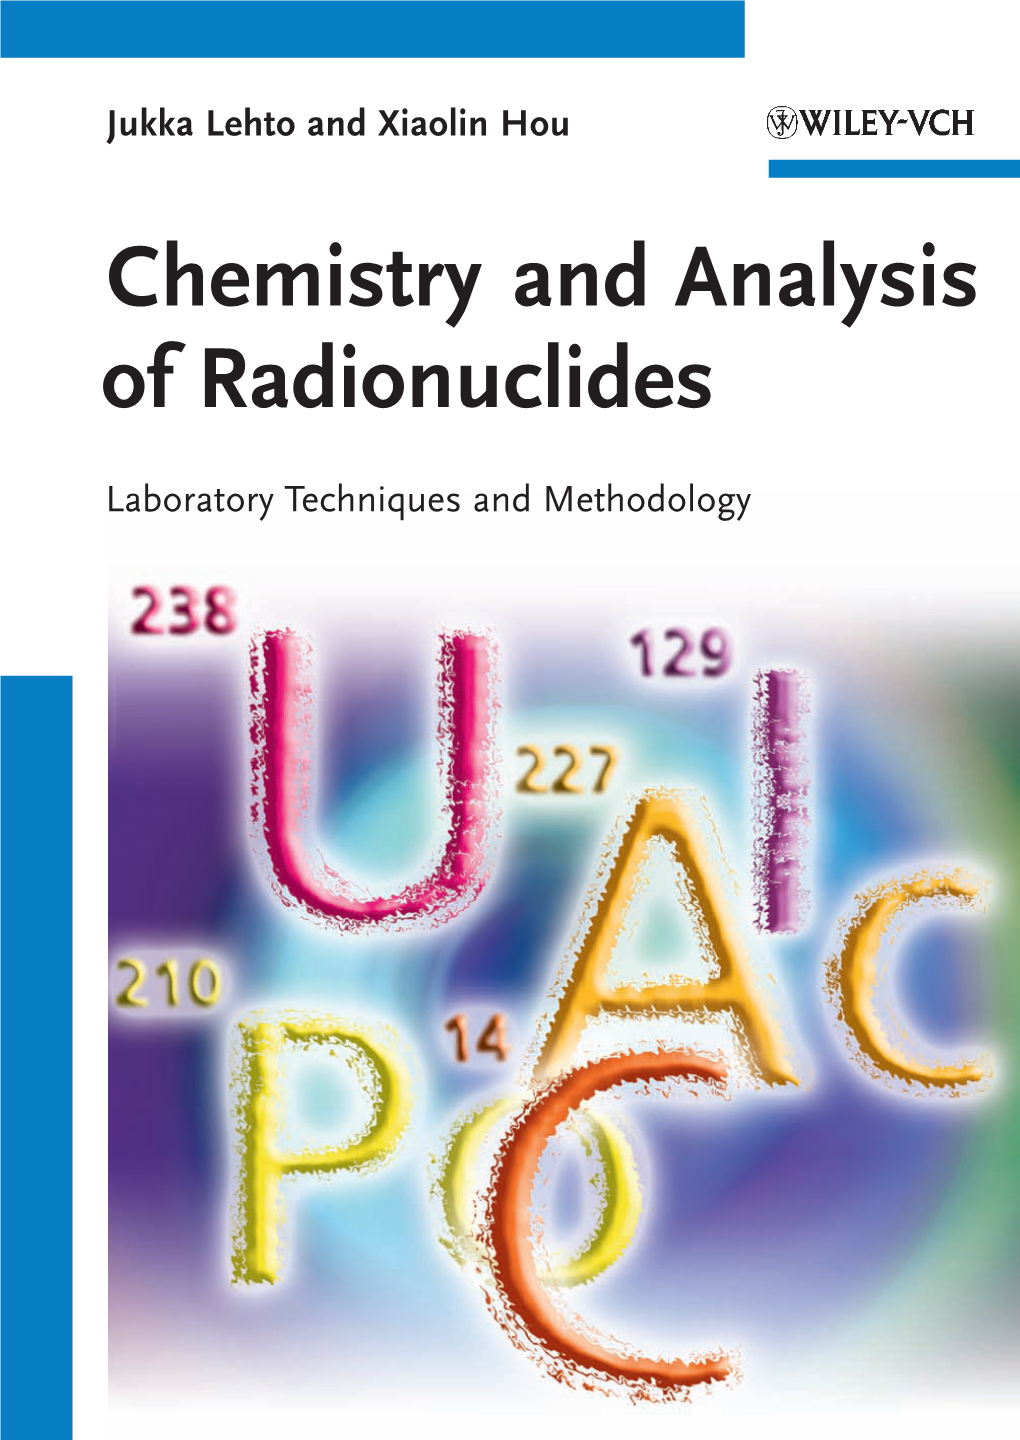 Chemistry and Analysis of Radionuclides